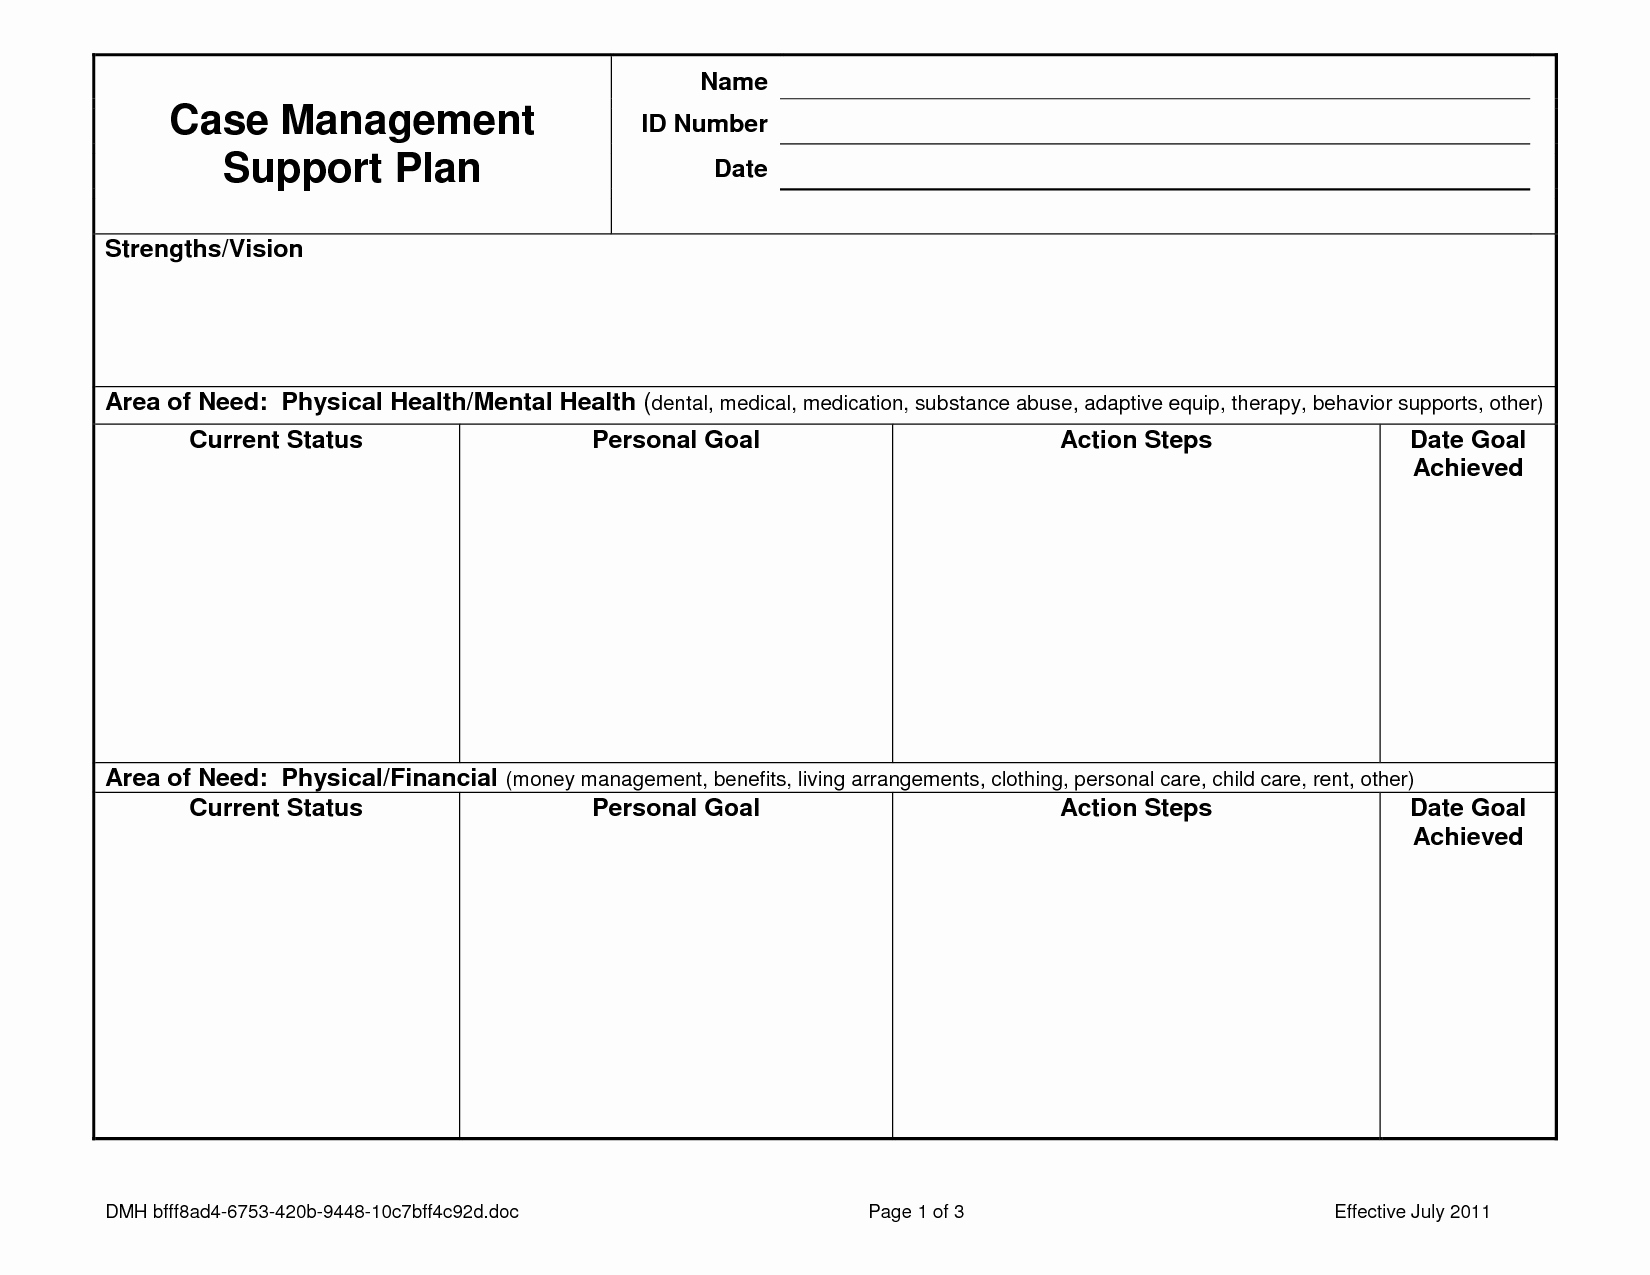 Case Note Template social Work Best Of Case Notes Template Case Management Service Plan